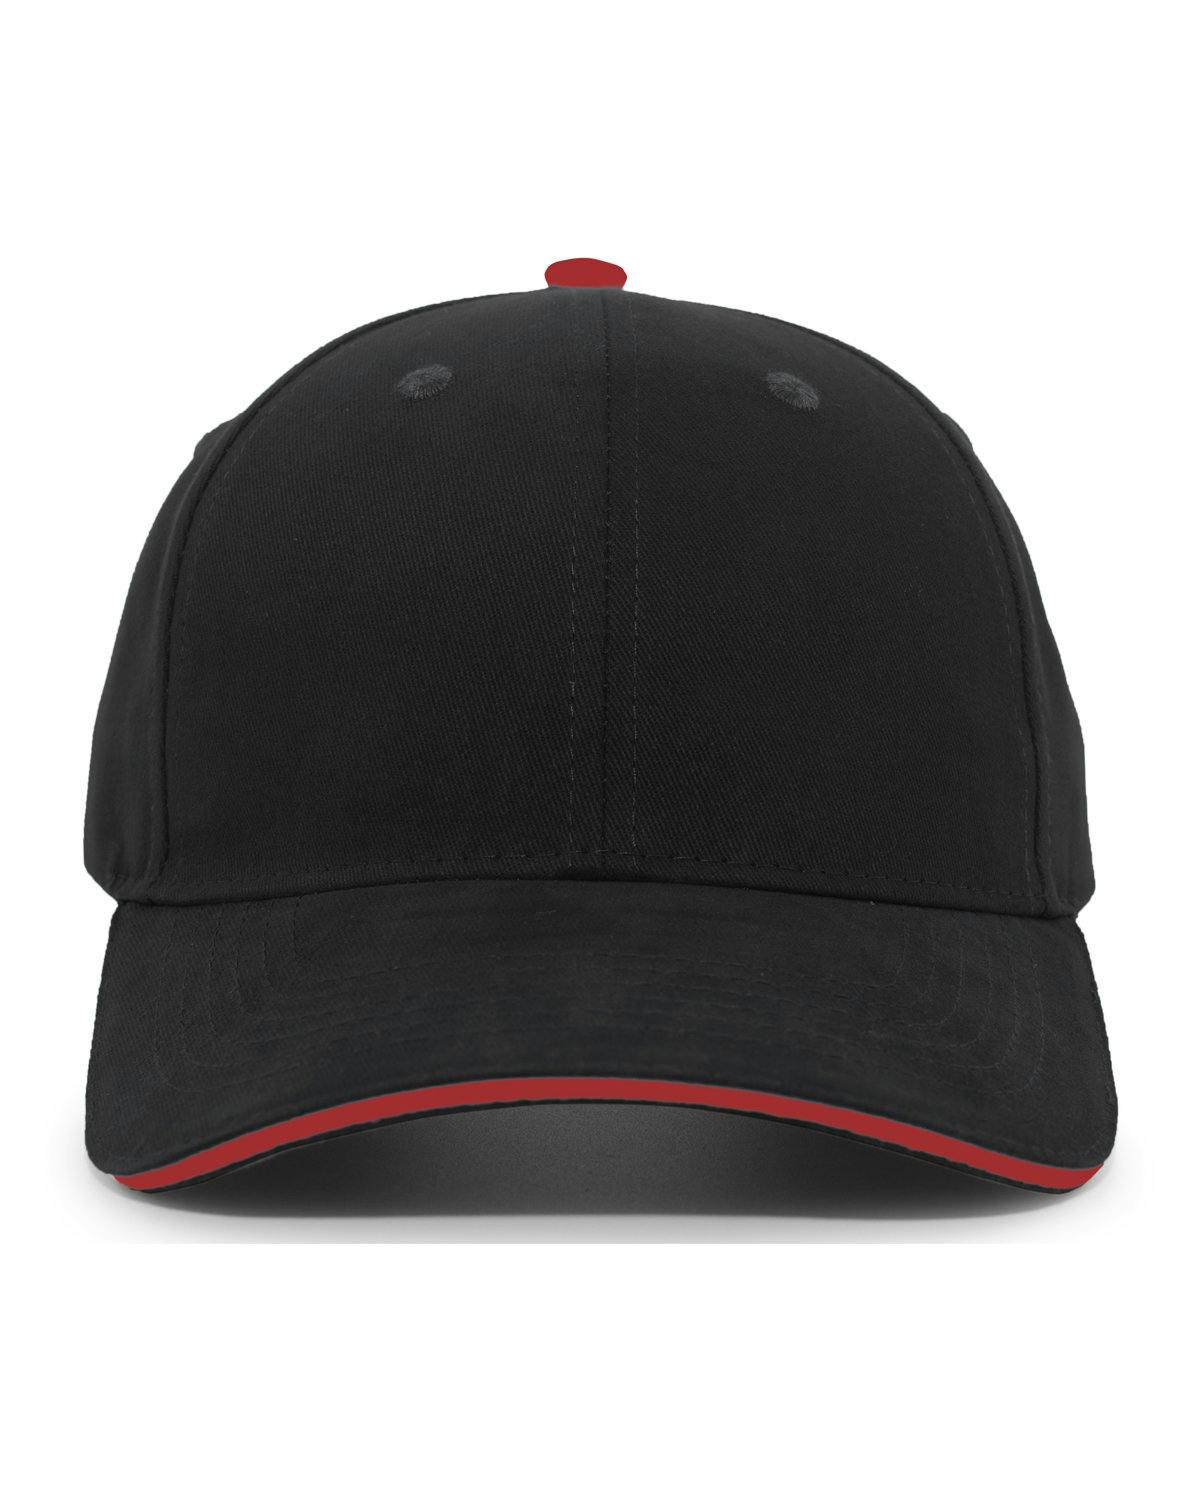 Image for Brushed Twill Cap With Sandwich Bill